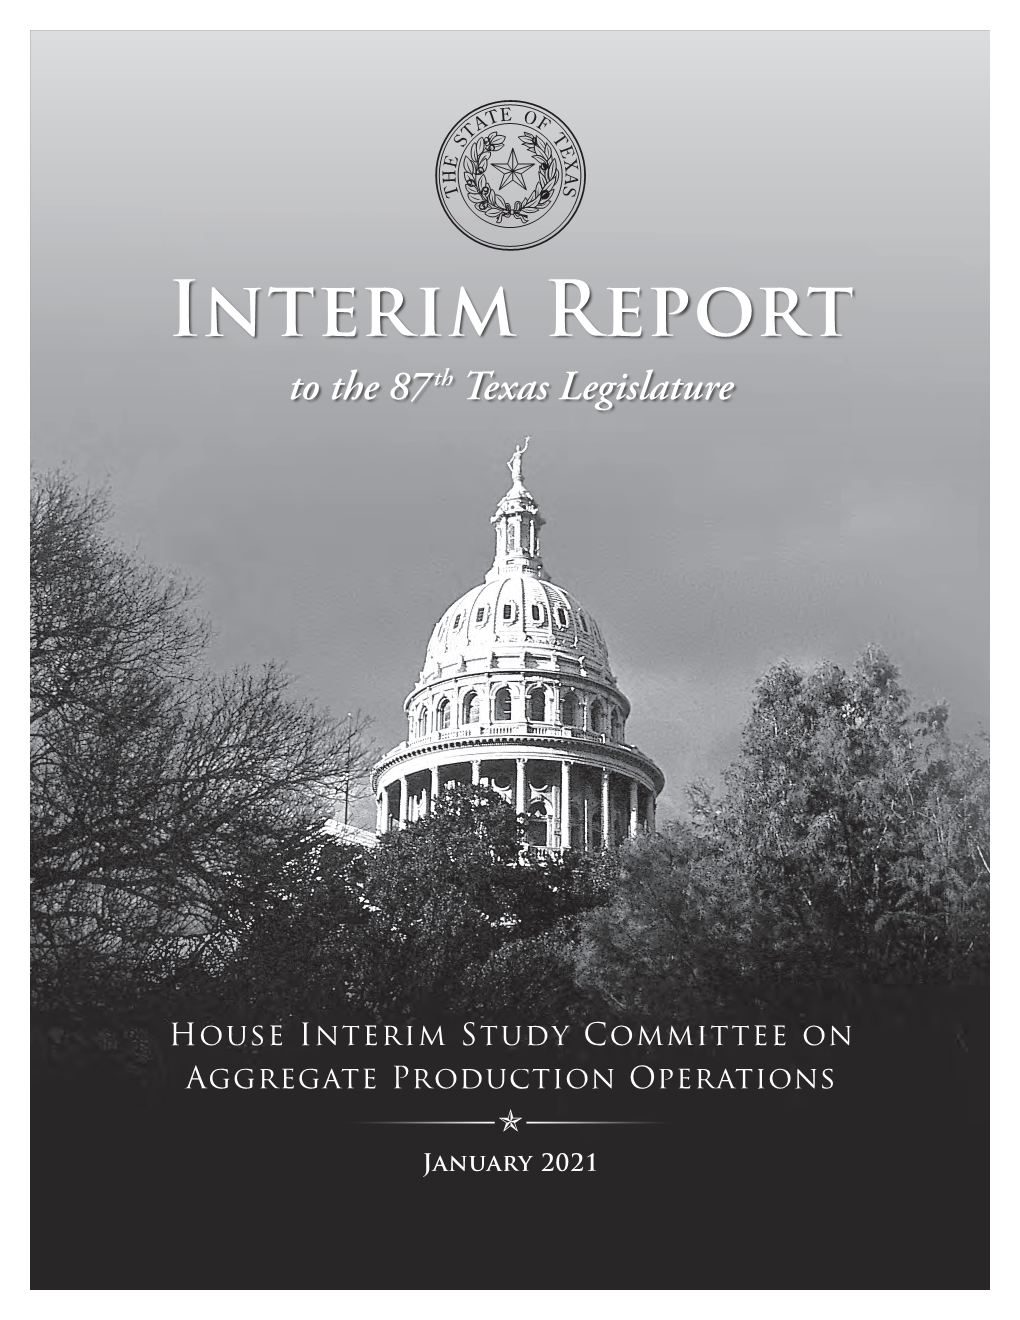 House Interim Study Committee on Aggregate Production Operations